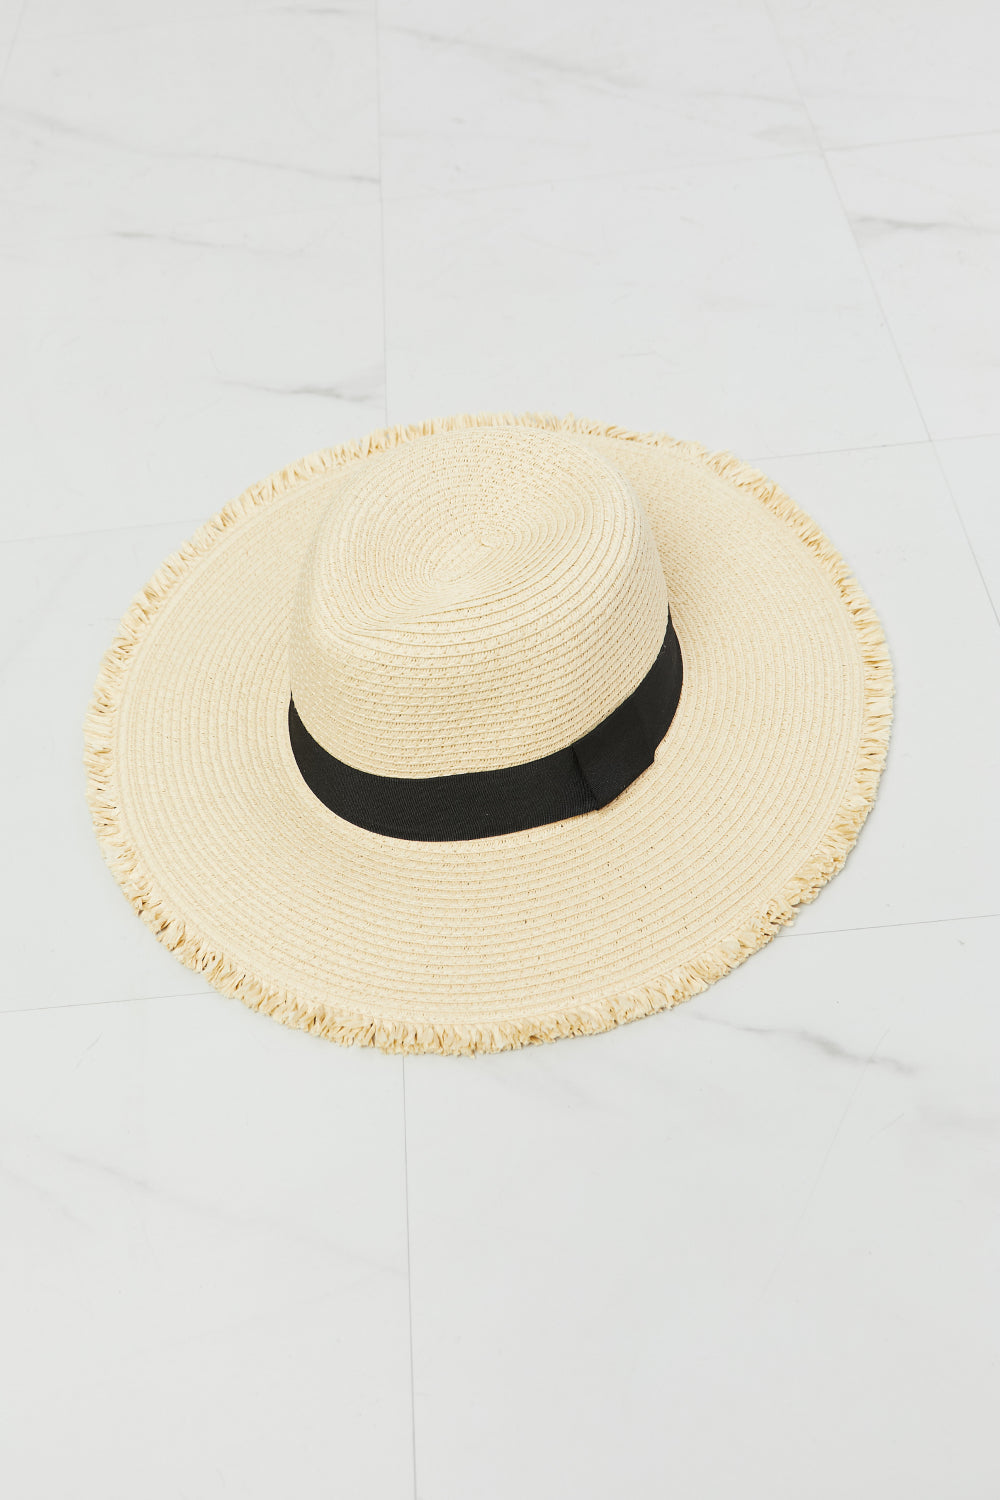 Fame Time For The Sun Straw Hat - Hats - FITGGINS